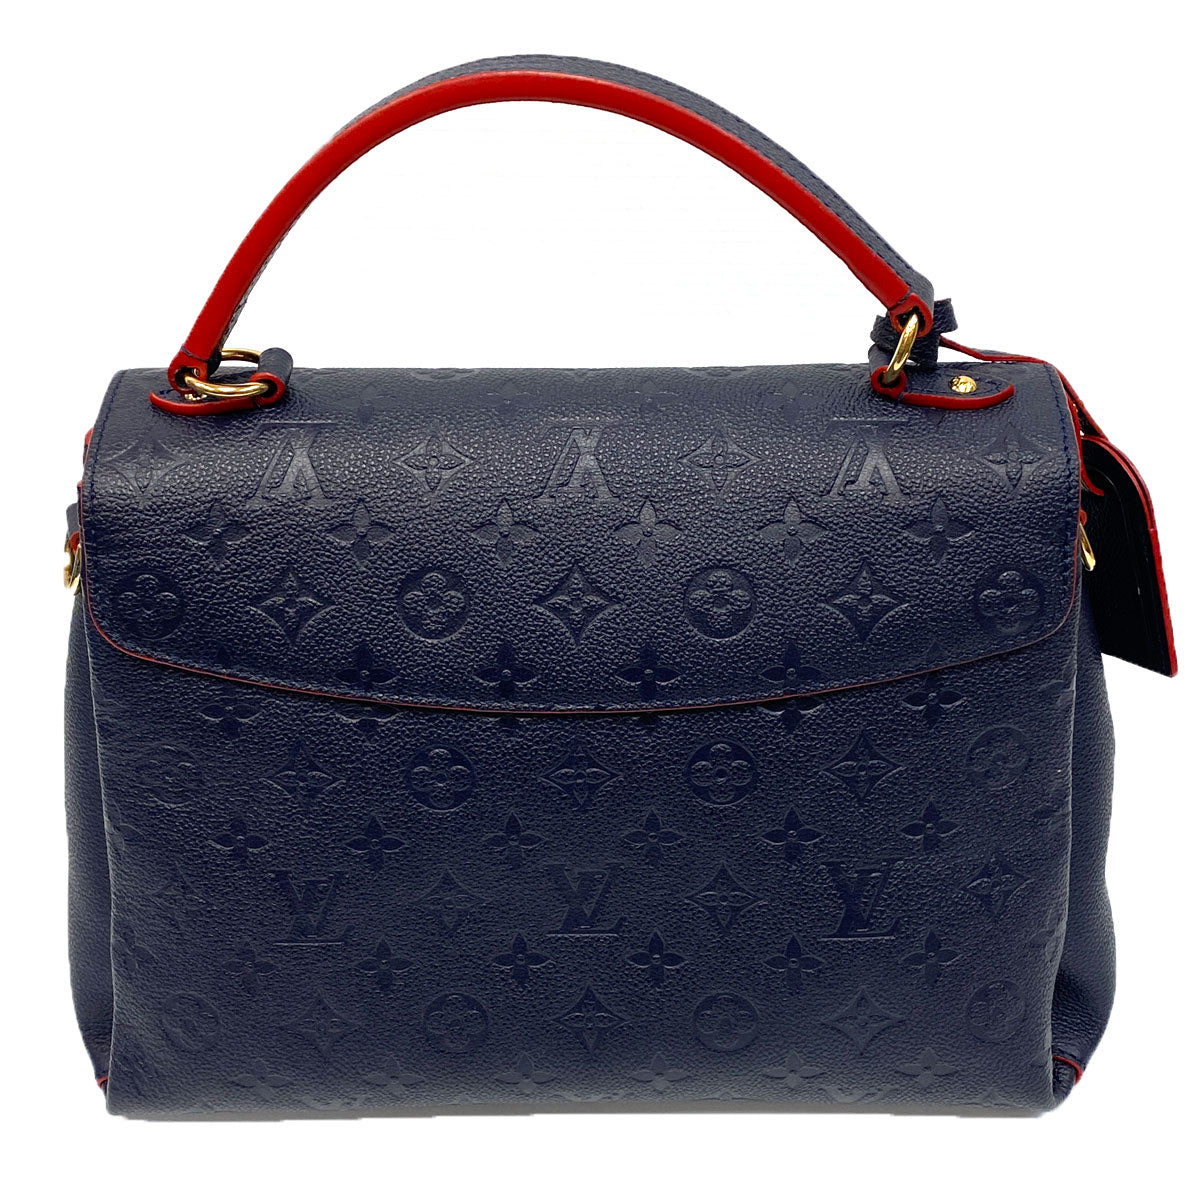 Georges MM bag in blue imprint leather